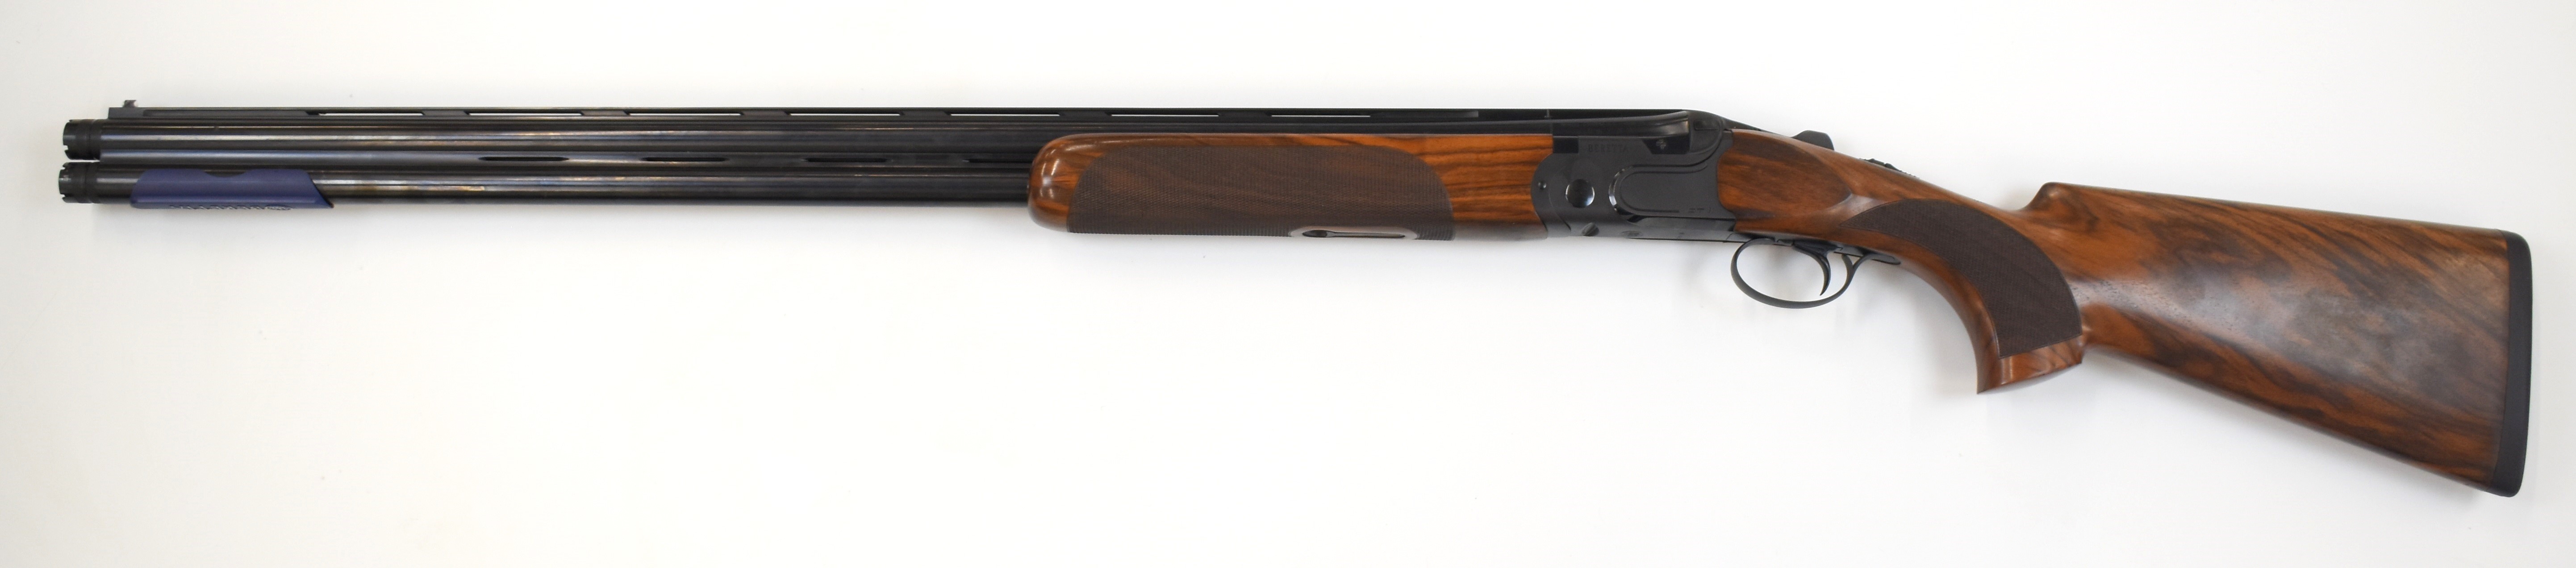 Beretta DT11 Sporting GMK 50th Anniversary Special Edition 12 bore over and under ejector shotgun - Image 7 of 13